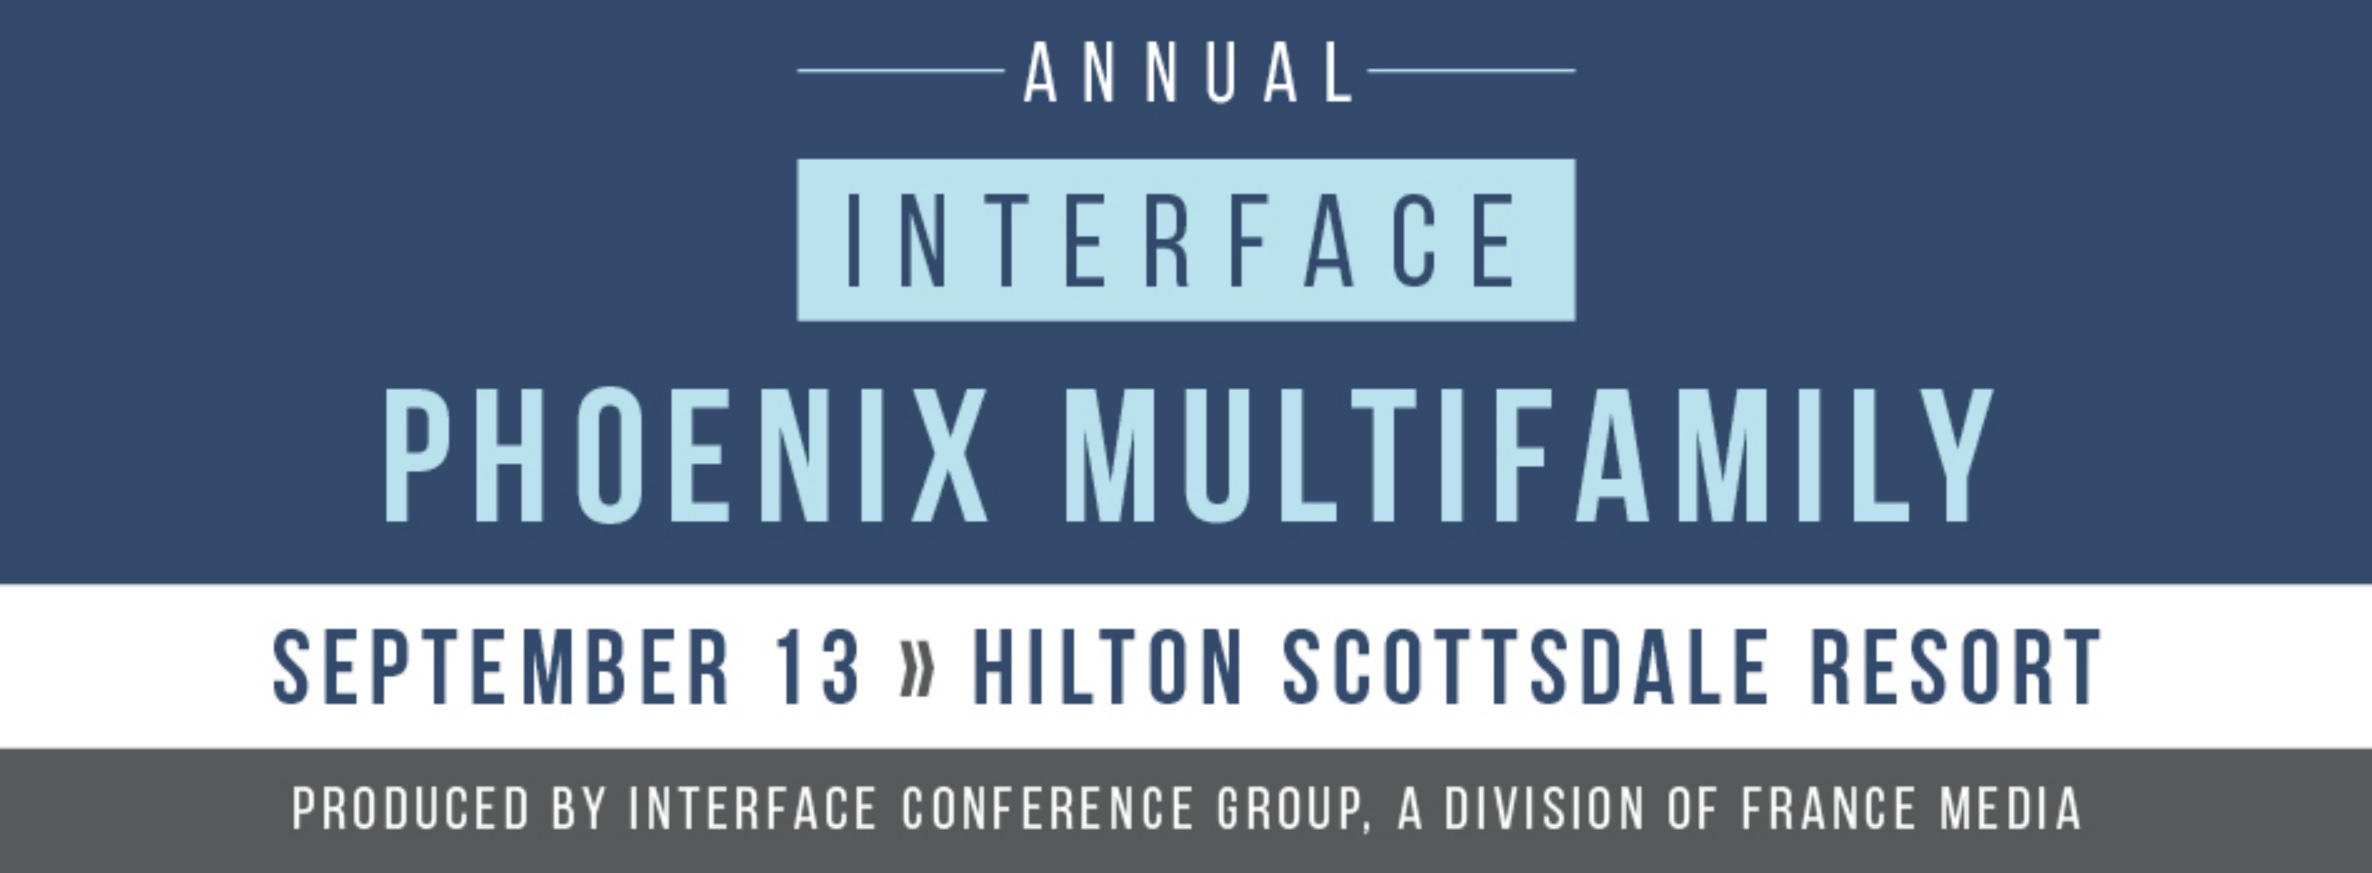 InterFace Phoenix Multifamily Conference 2022